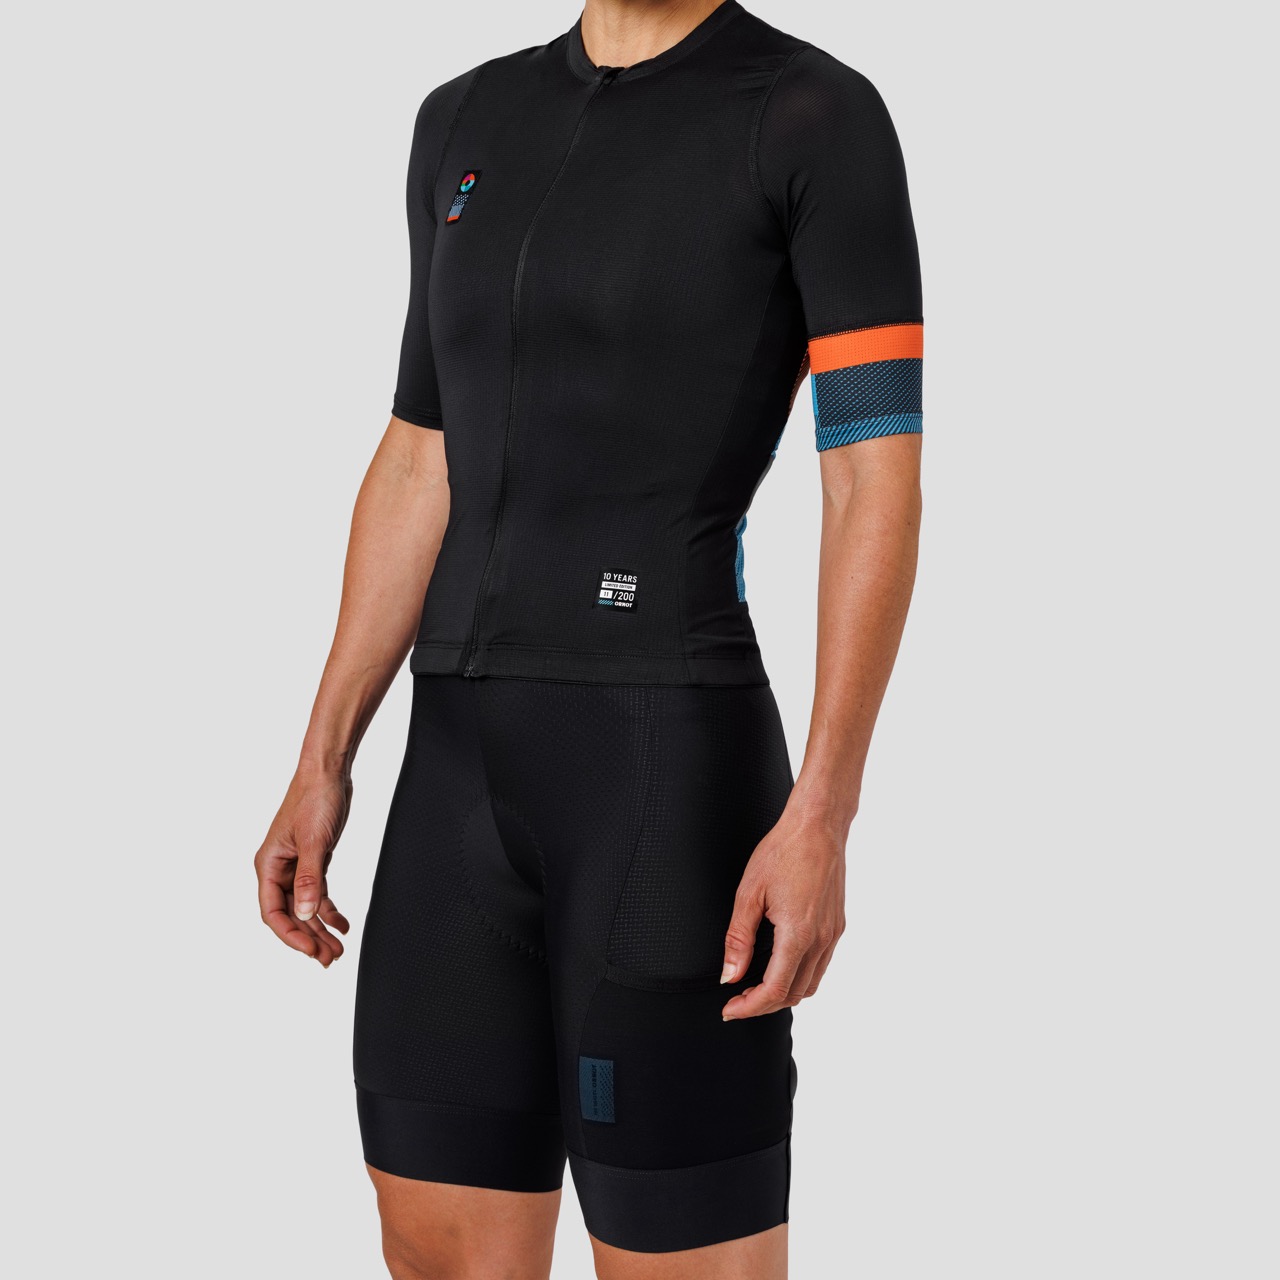 Ornot Decade Jersey Womens front side